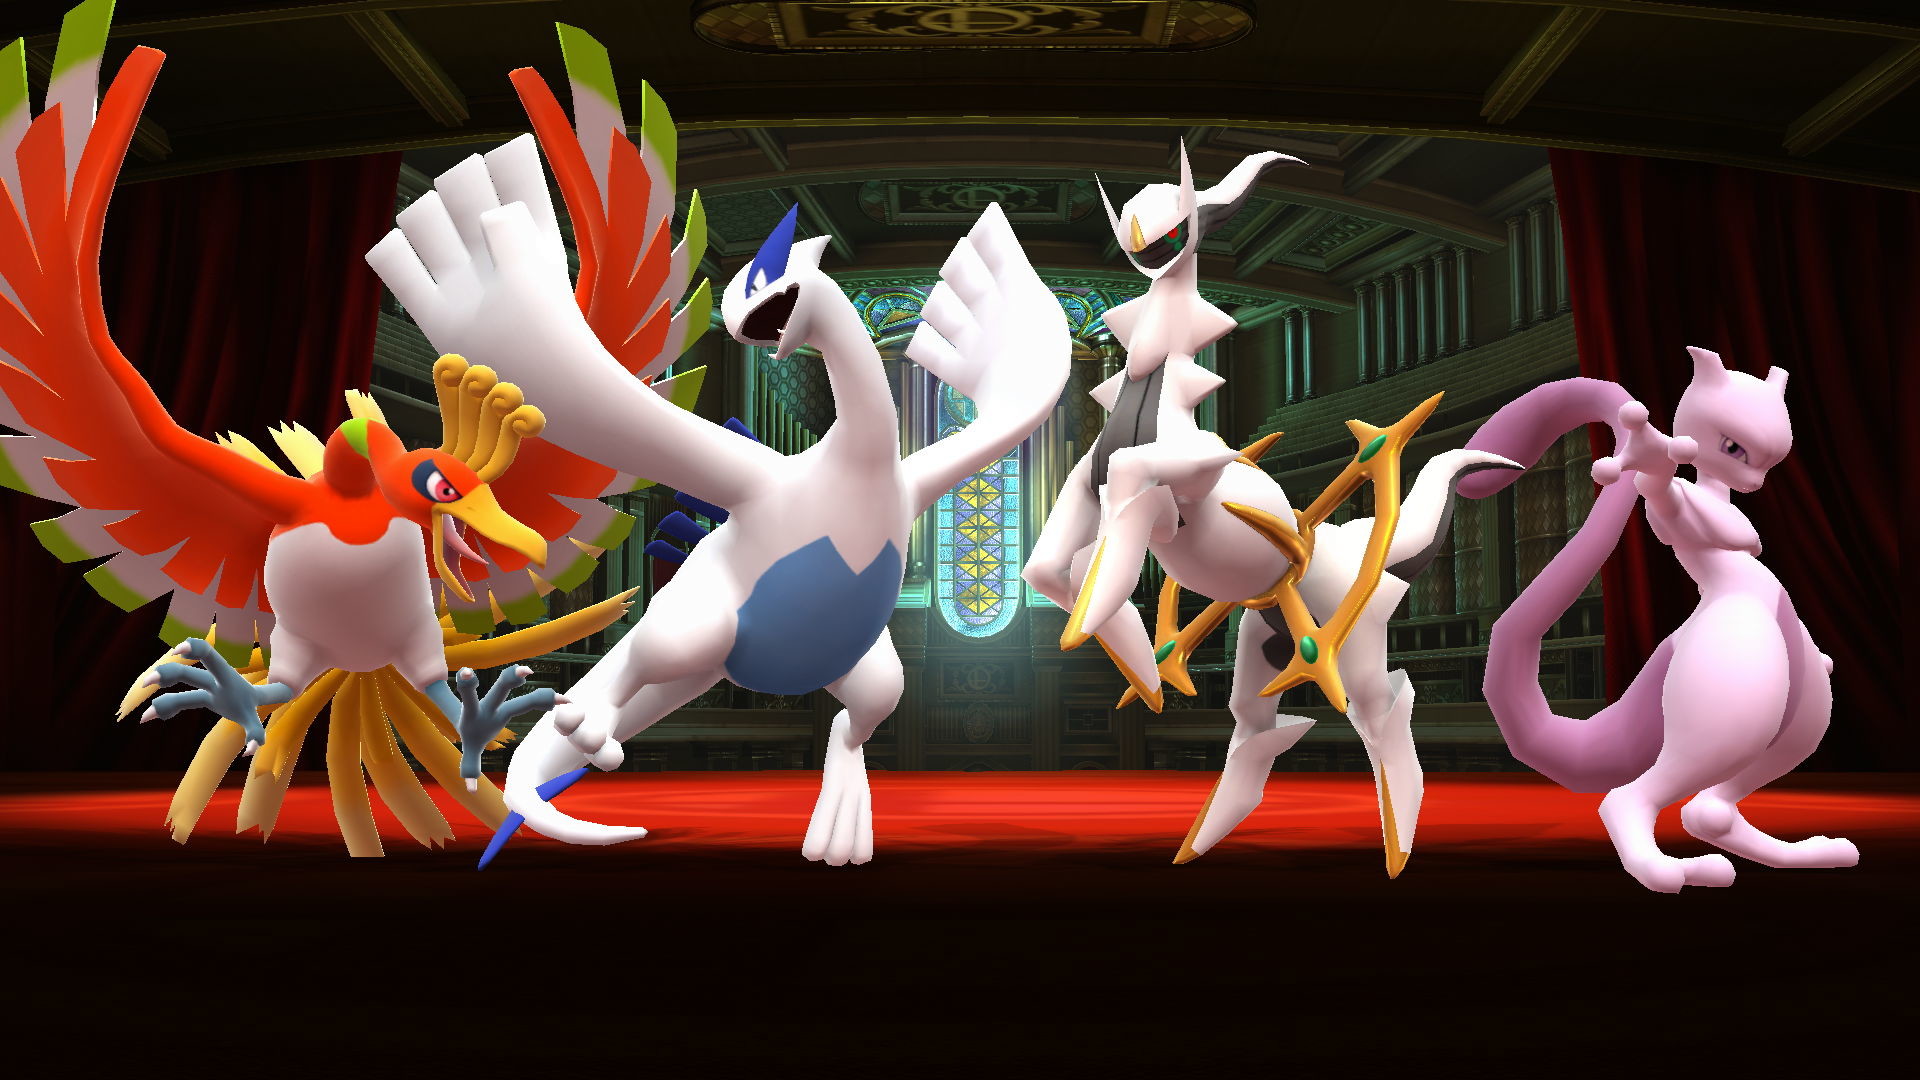 1920x1080 ... Ho-Oh, Lugia, Arceus, and Mewtwo by UKD-DAWG